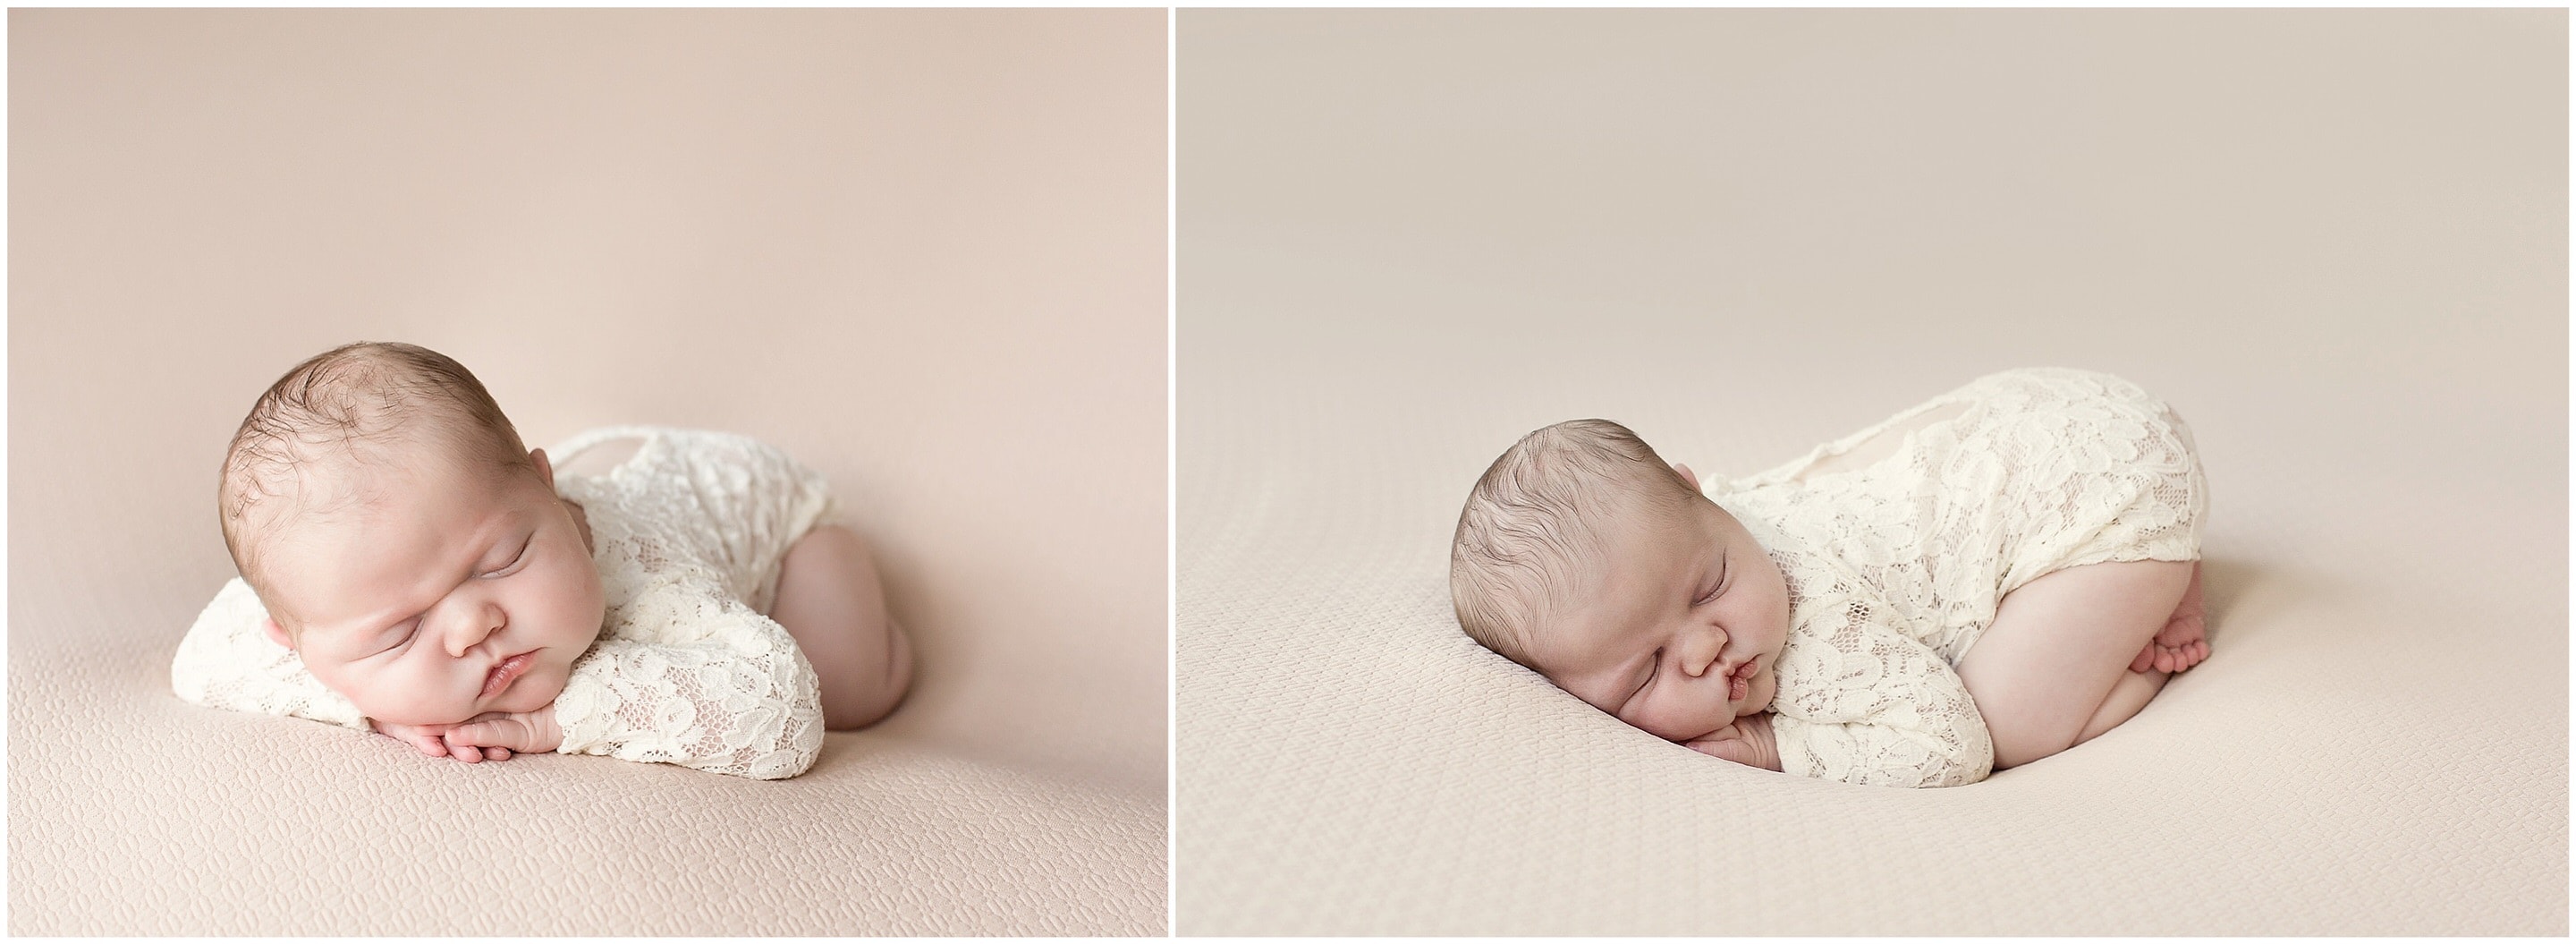 Legal Case Examples from Newborn Photography Class with Kelly Brown |  CreativeLive